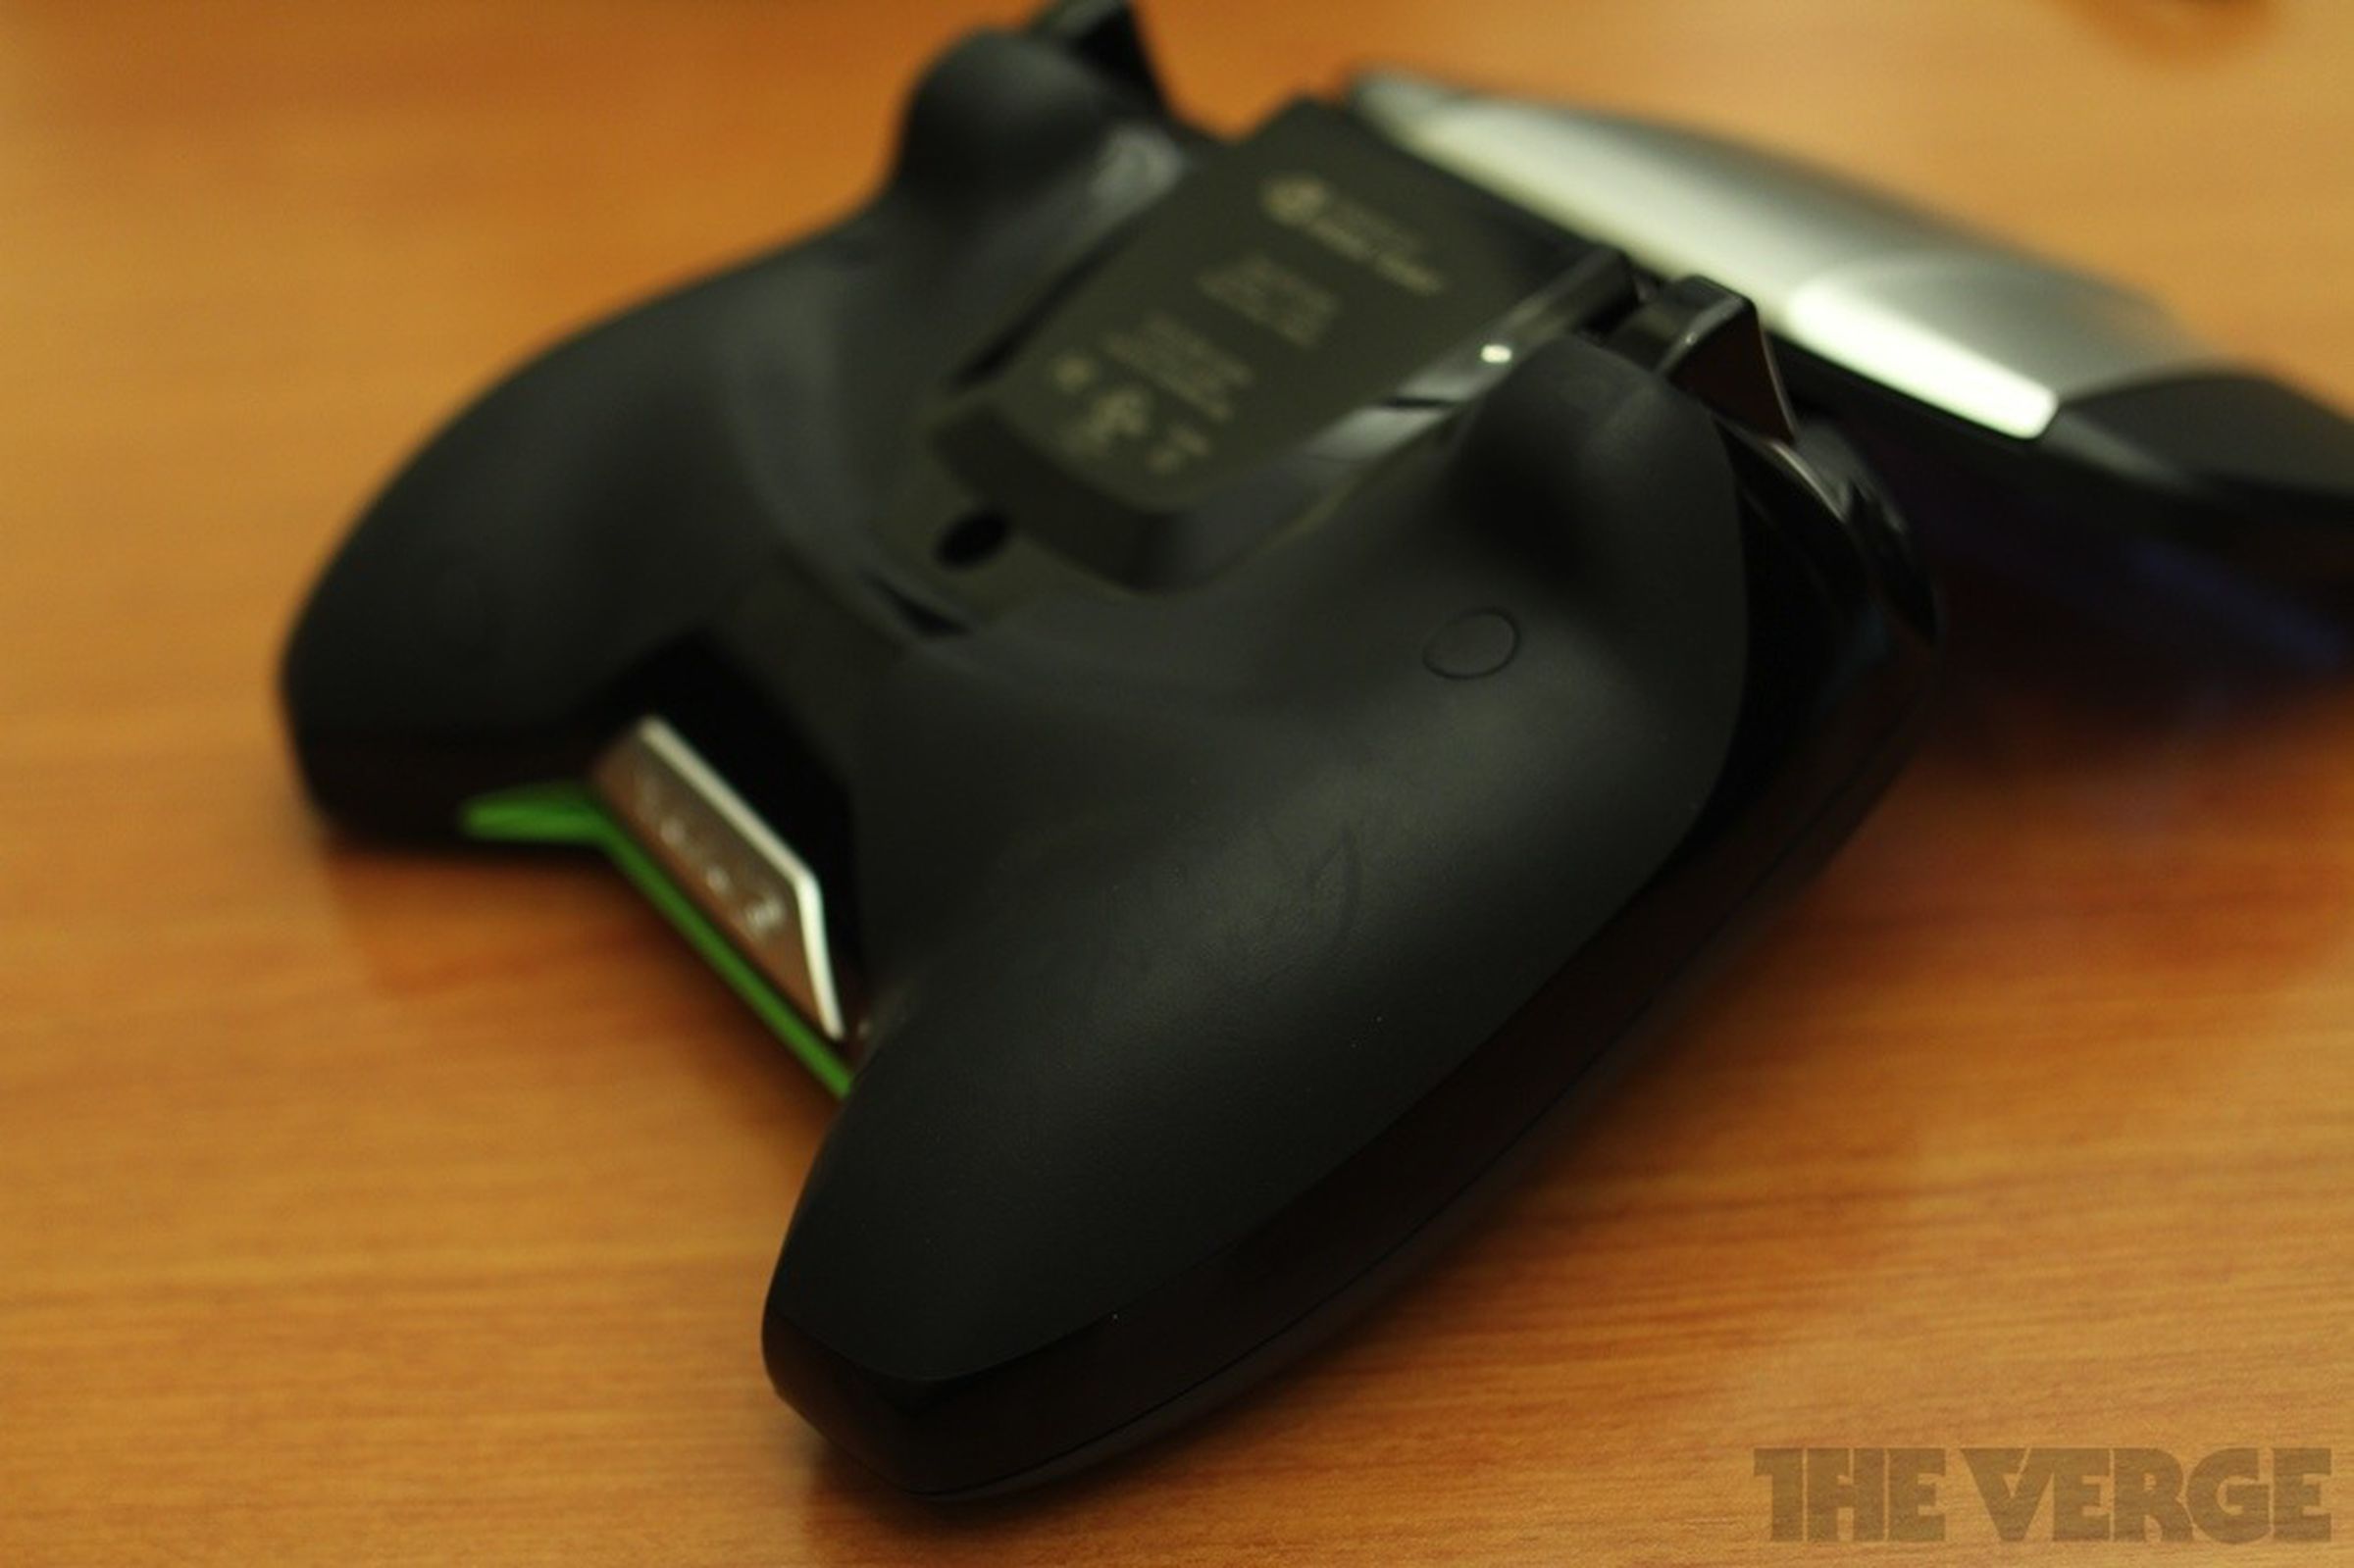 Nvidia Shield production prototype hands-on pictures